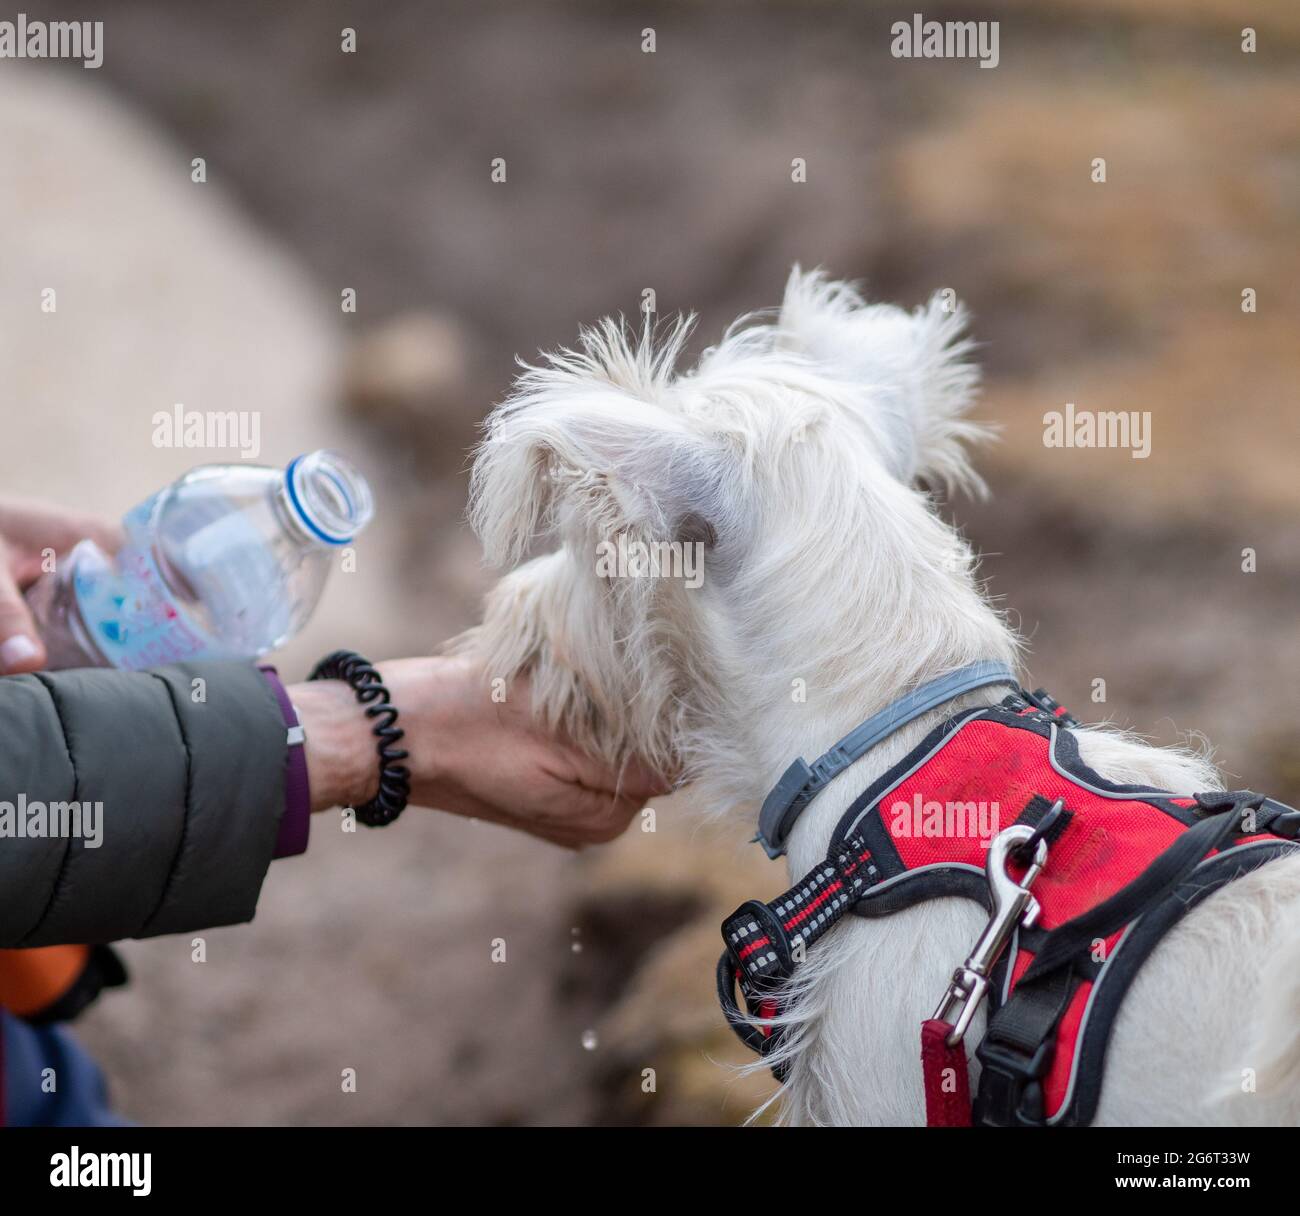 Unrecognizable person giving water to puppy to drink. Person giving water from a bottle to white dog. Stock Photo